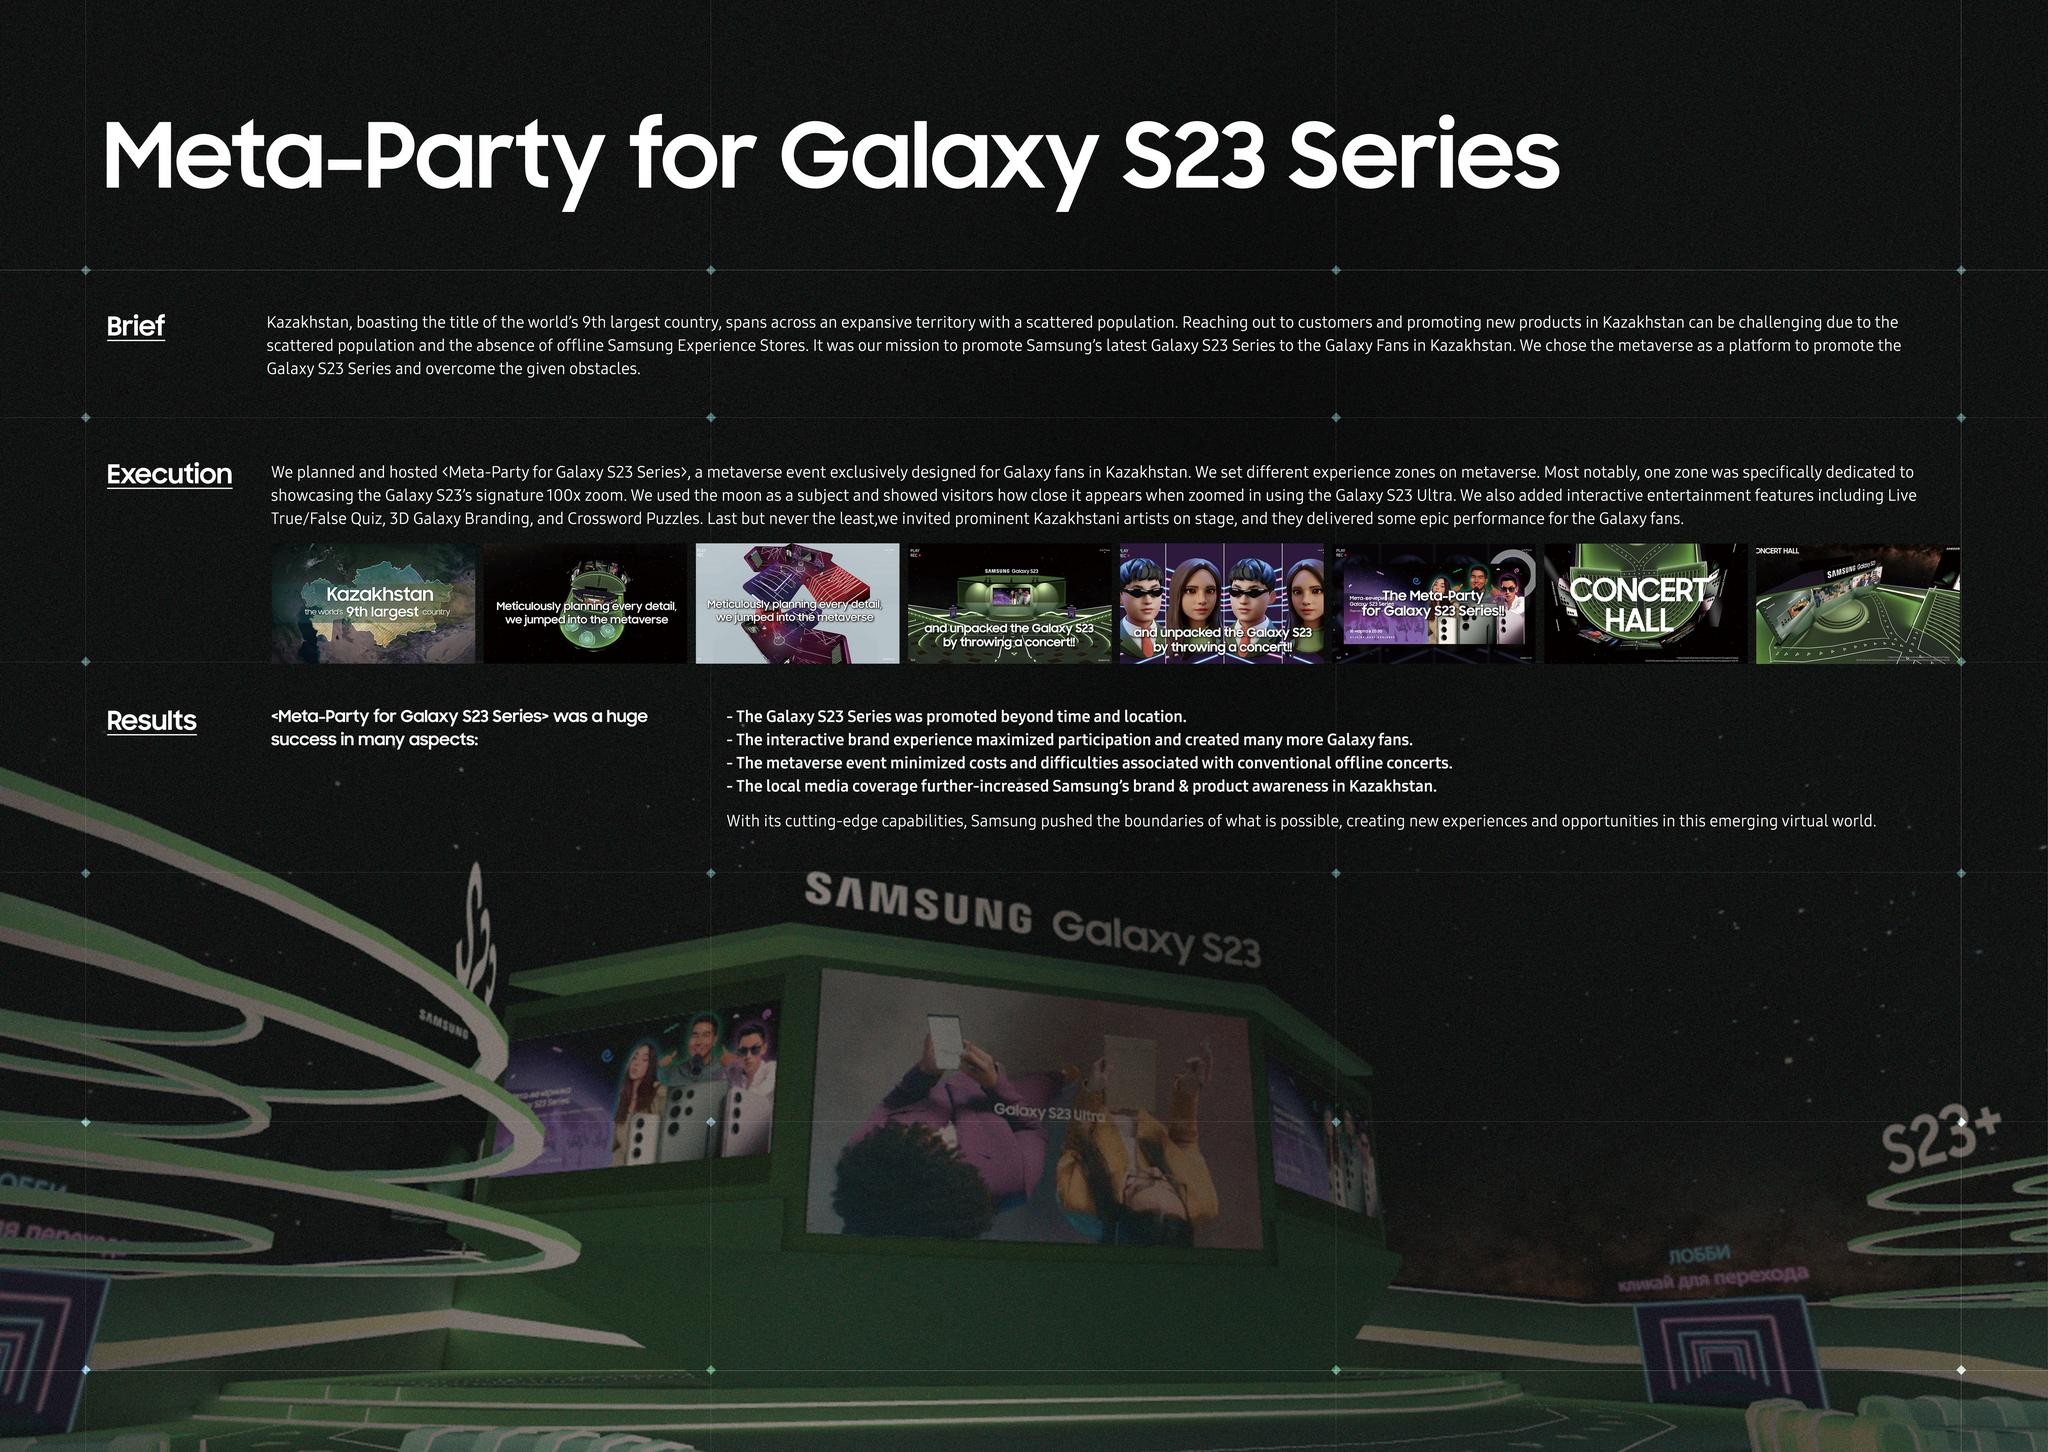 Meta-party for Galaxy S23 Series